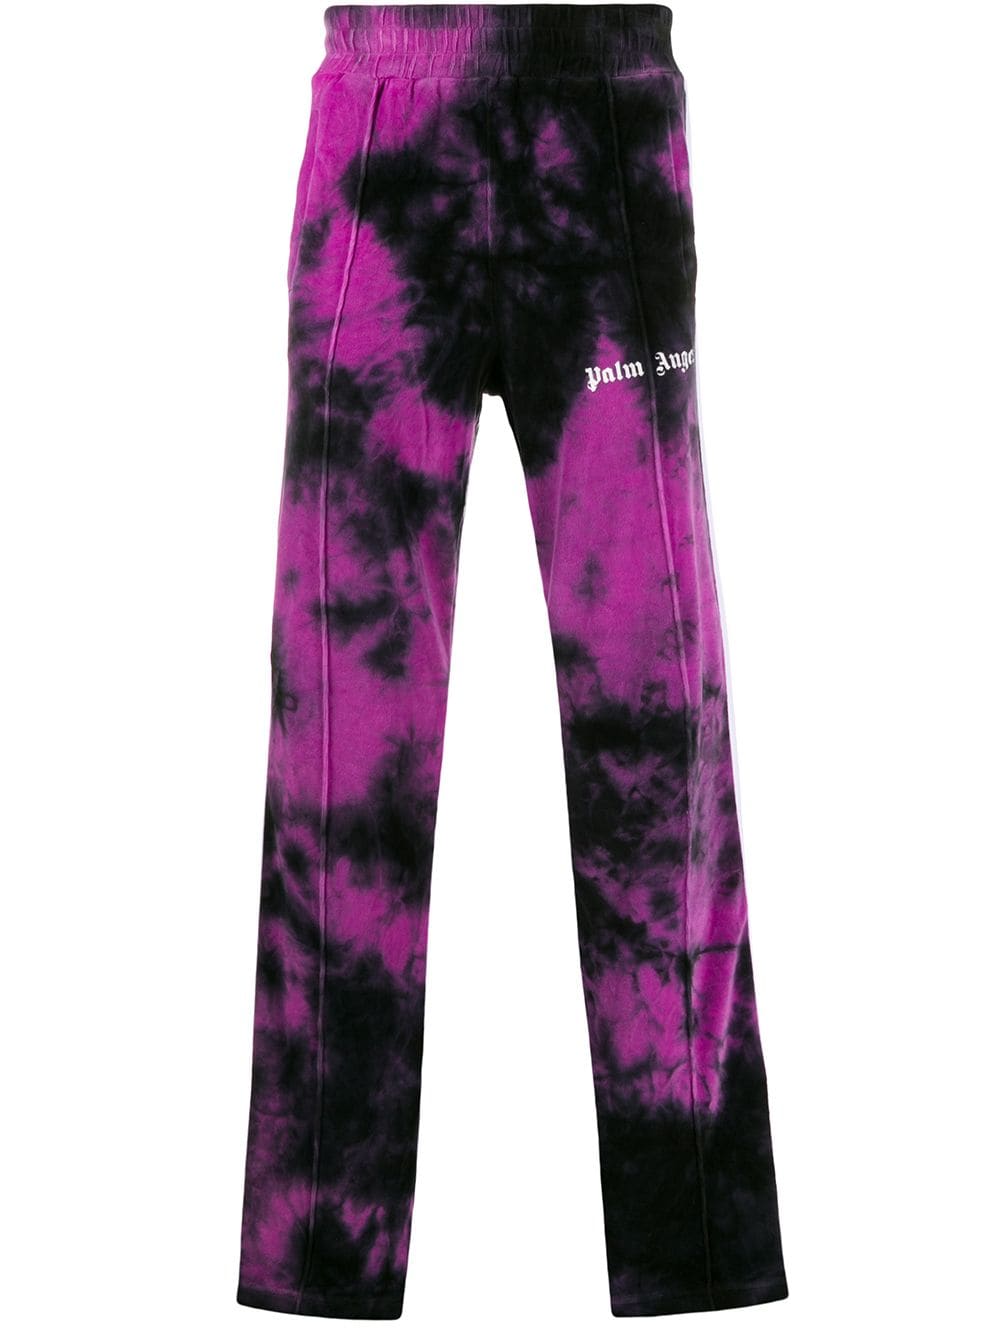 PALM ANGELS TIE DYE CHENILLE TRACK trousers,11295049